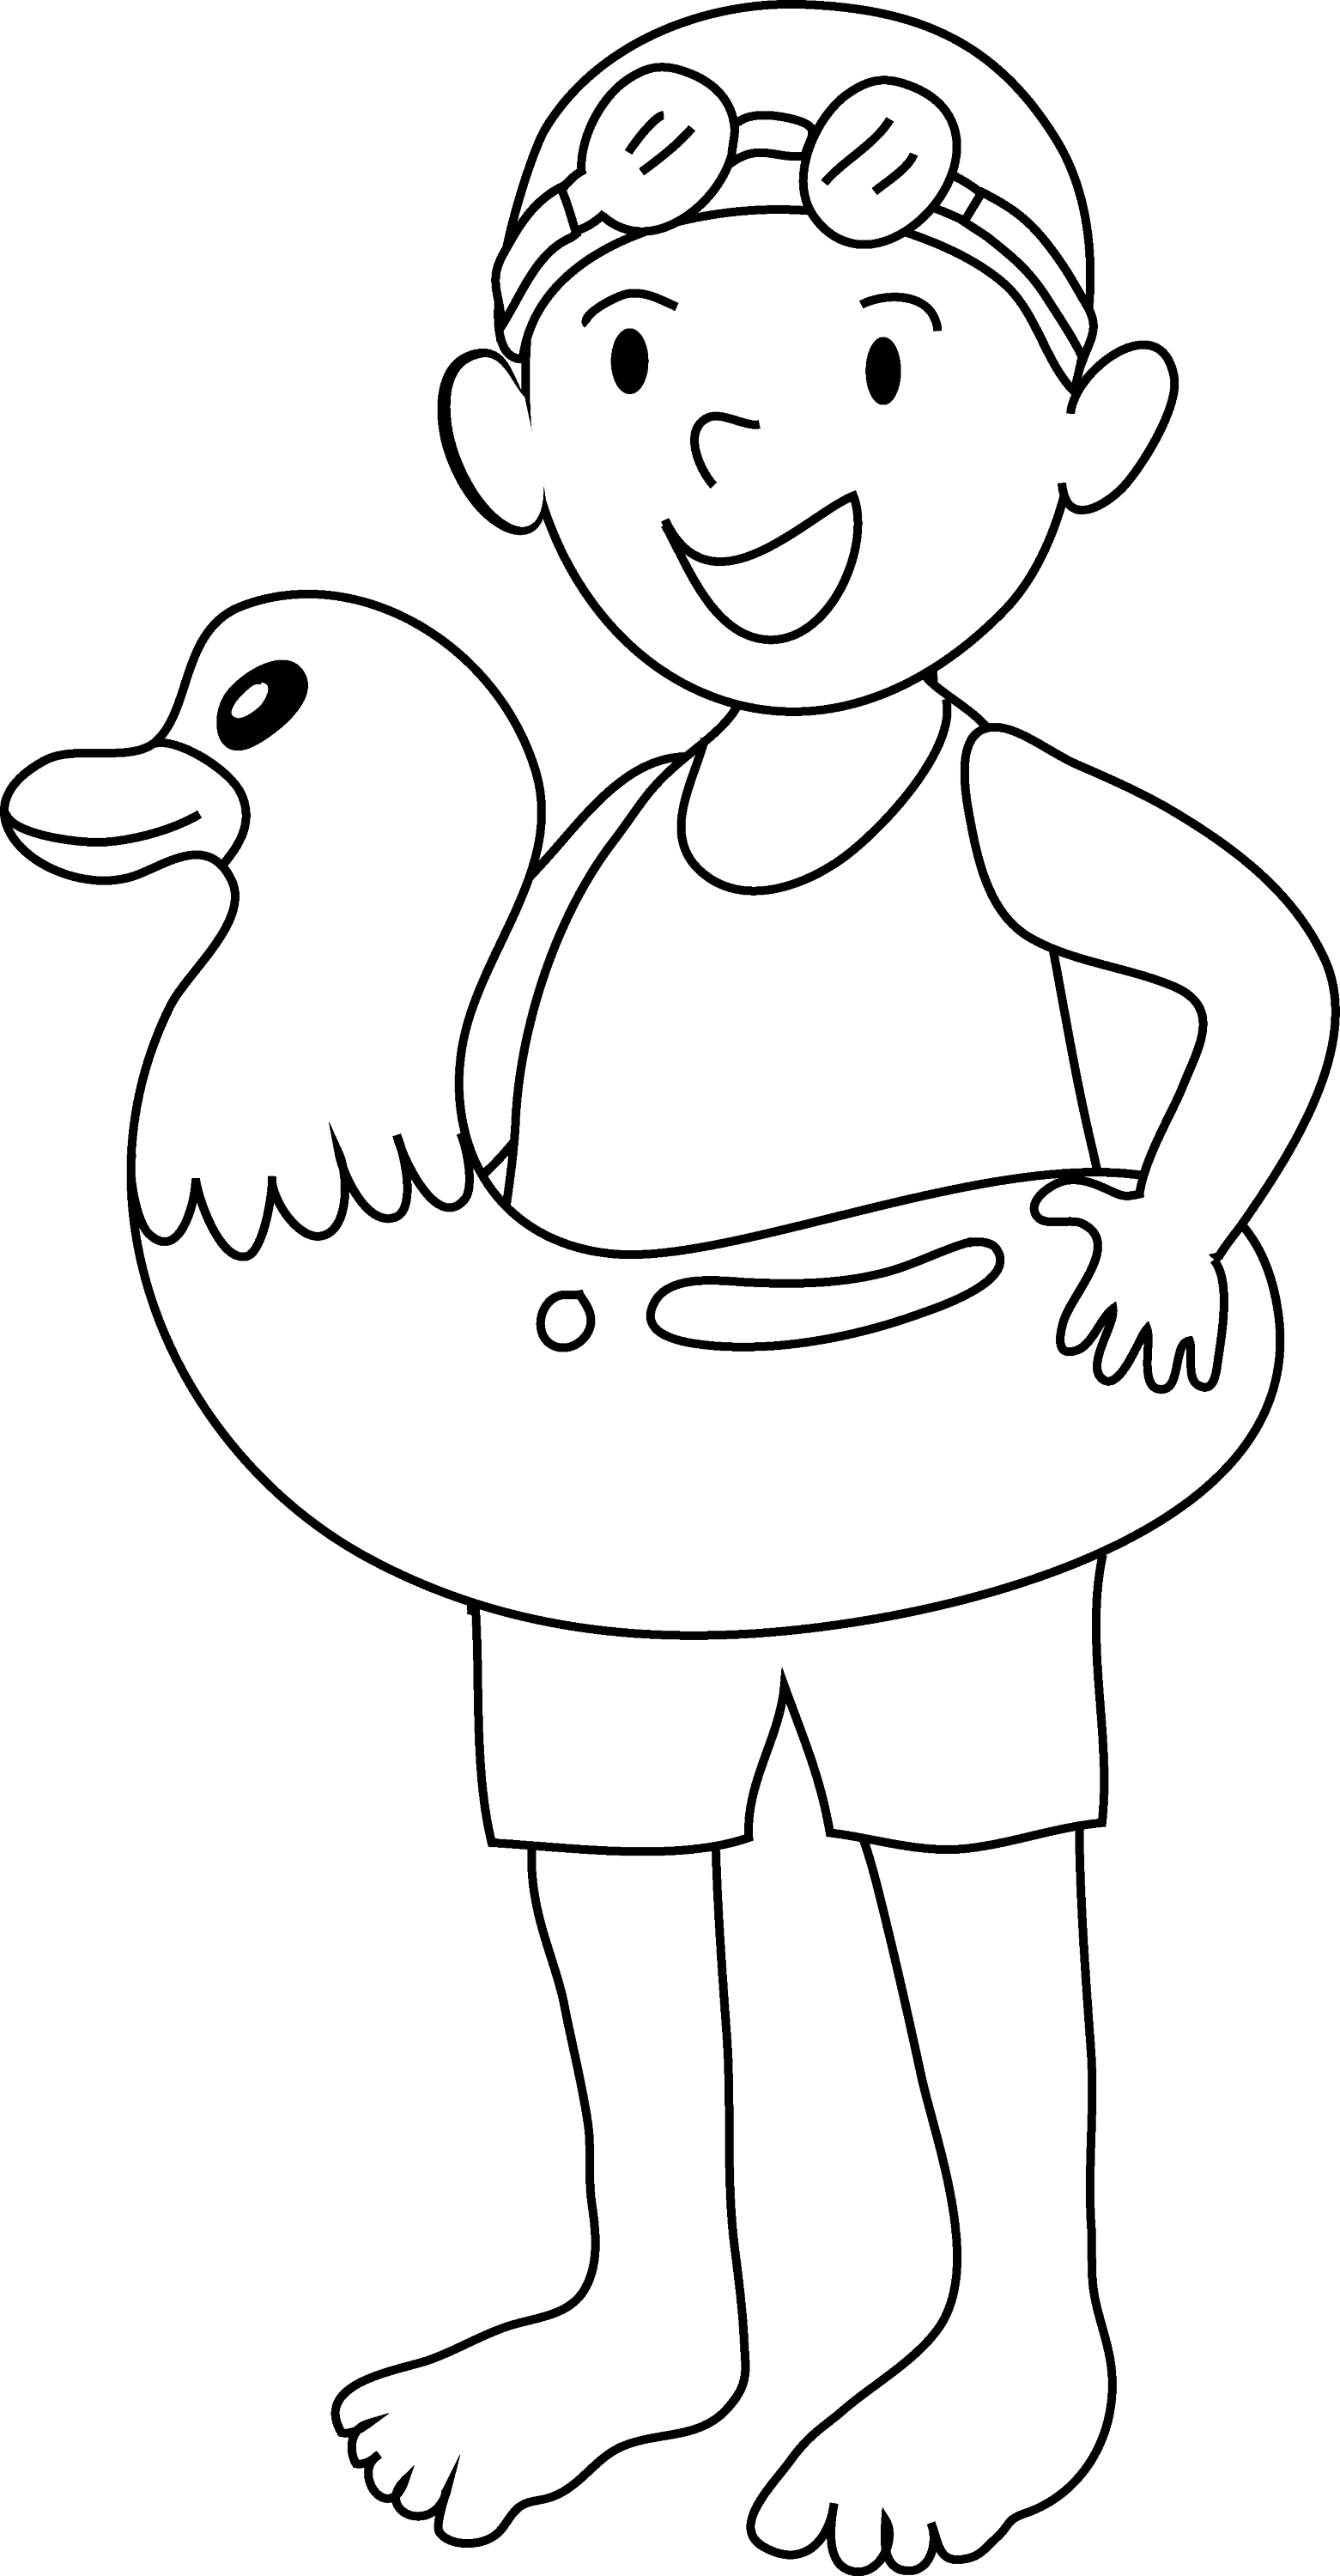 Download Coloring Page of Kid Going Swimming - Free Clip Art